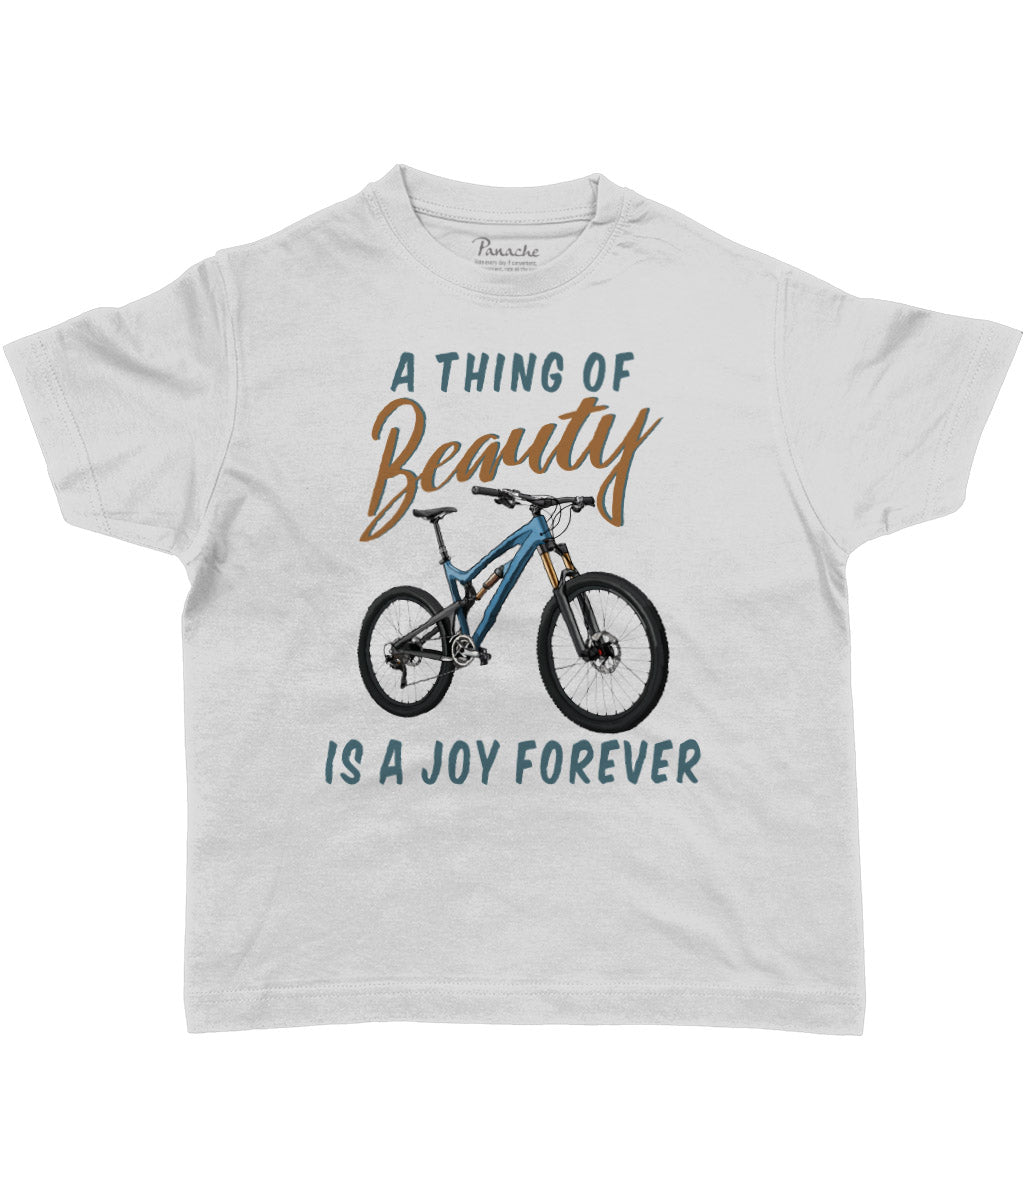 A Thing of Beauty is a Joy Forever Kids Cycling T-shirt Grey